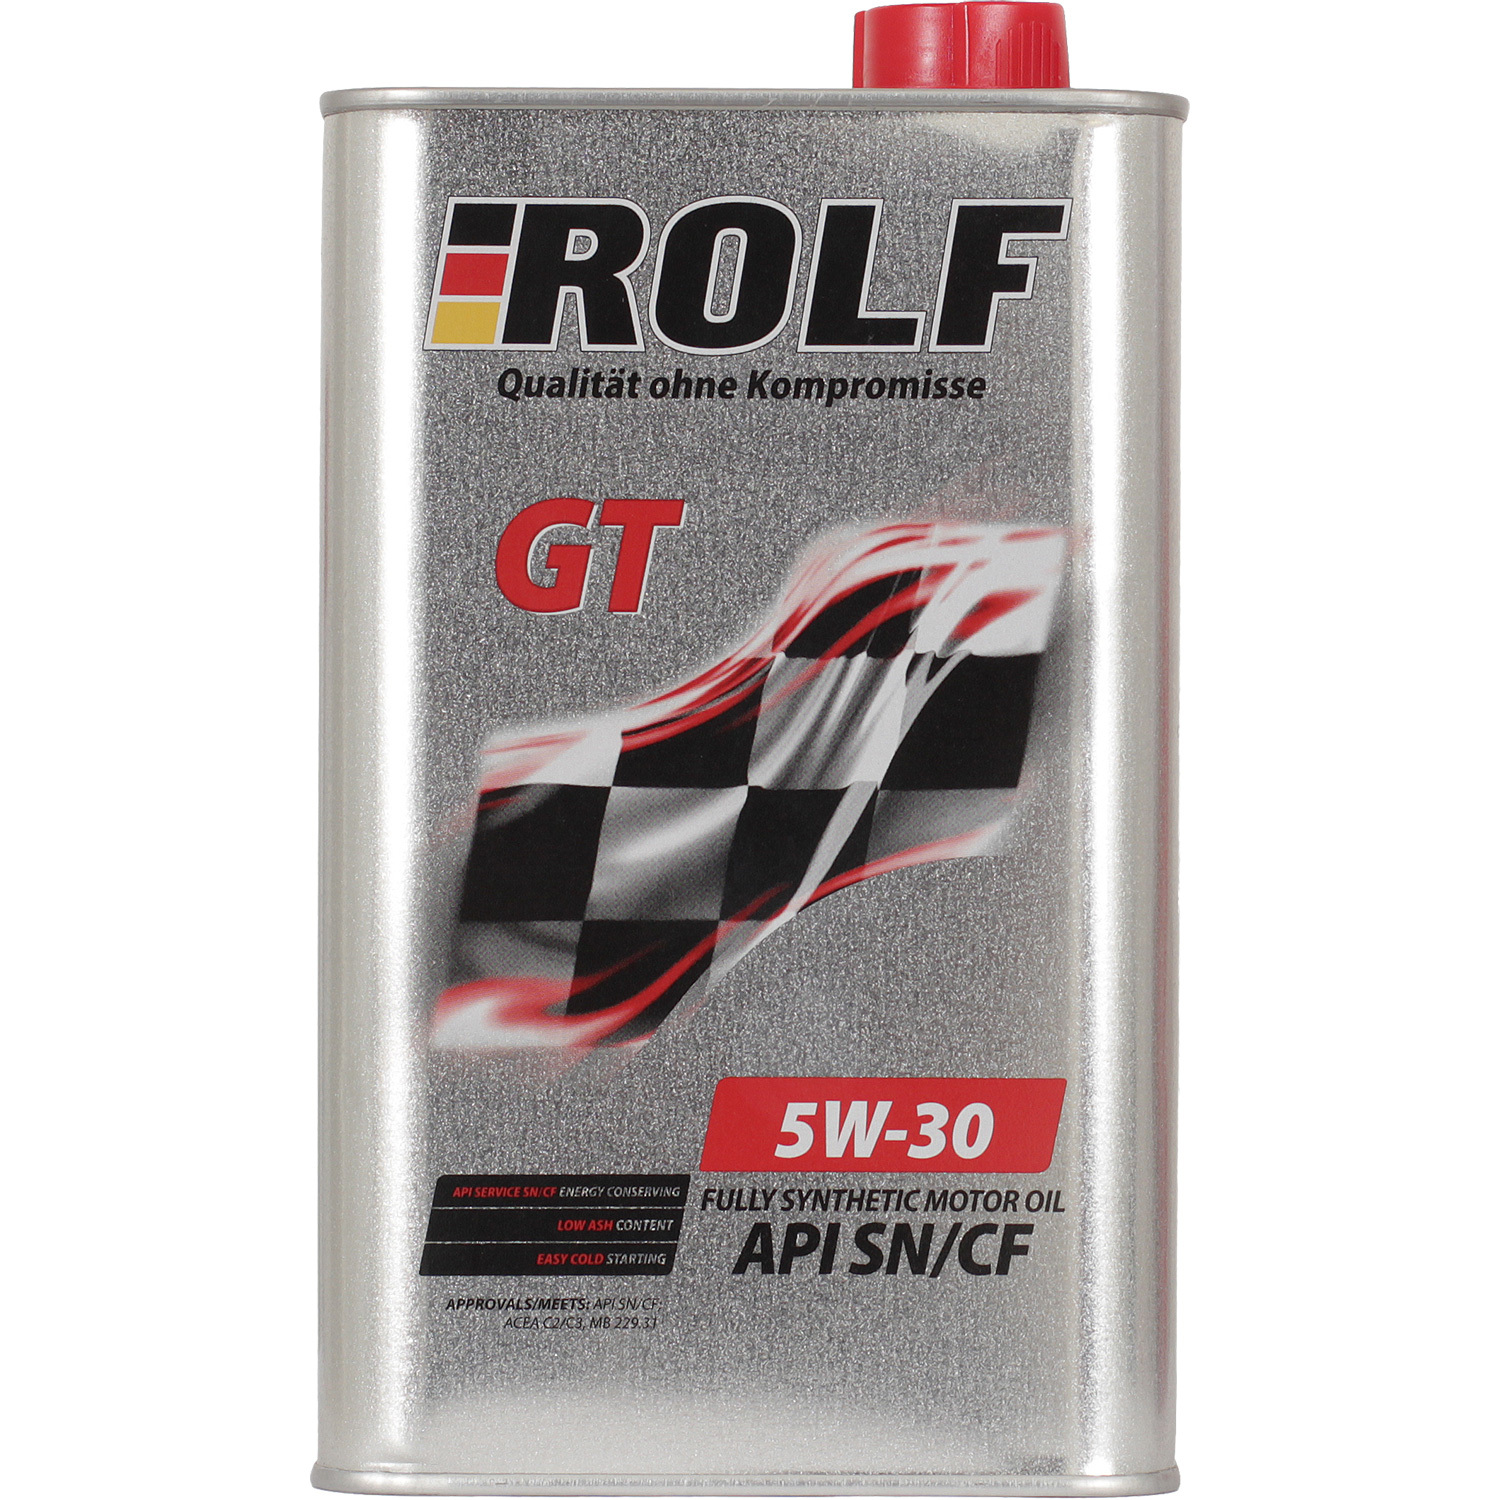 Rolf Моторное масло Rolf GT 5W-30, 1 л rolf моторное масло rolf gt 5w 40 1 л